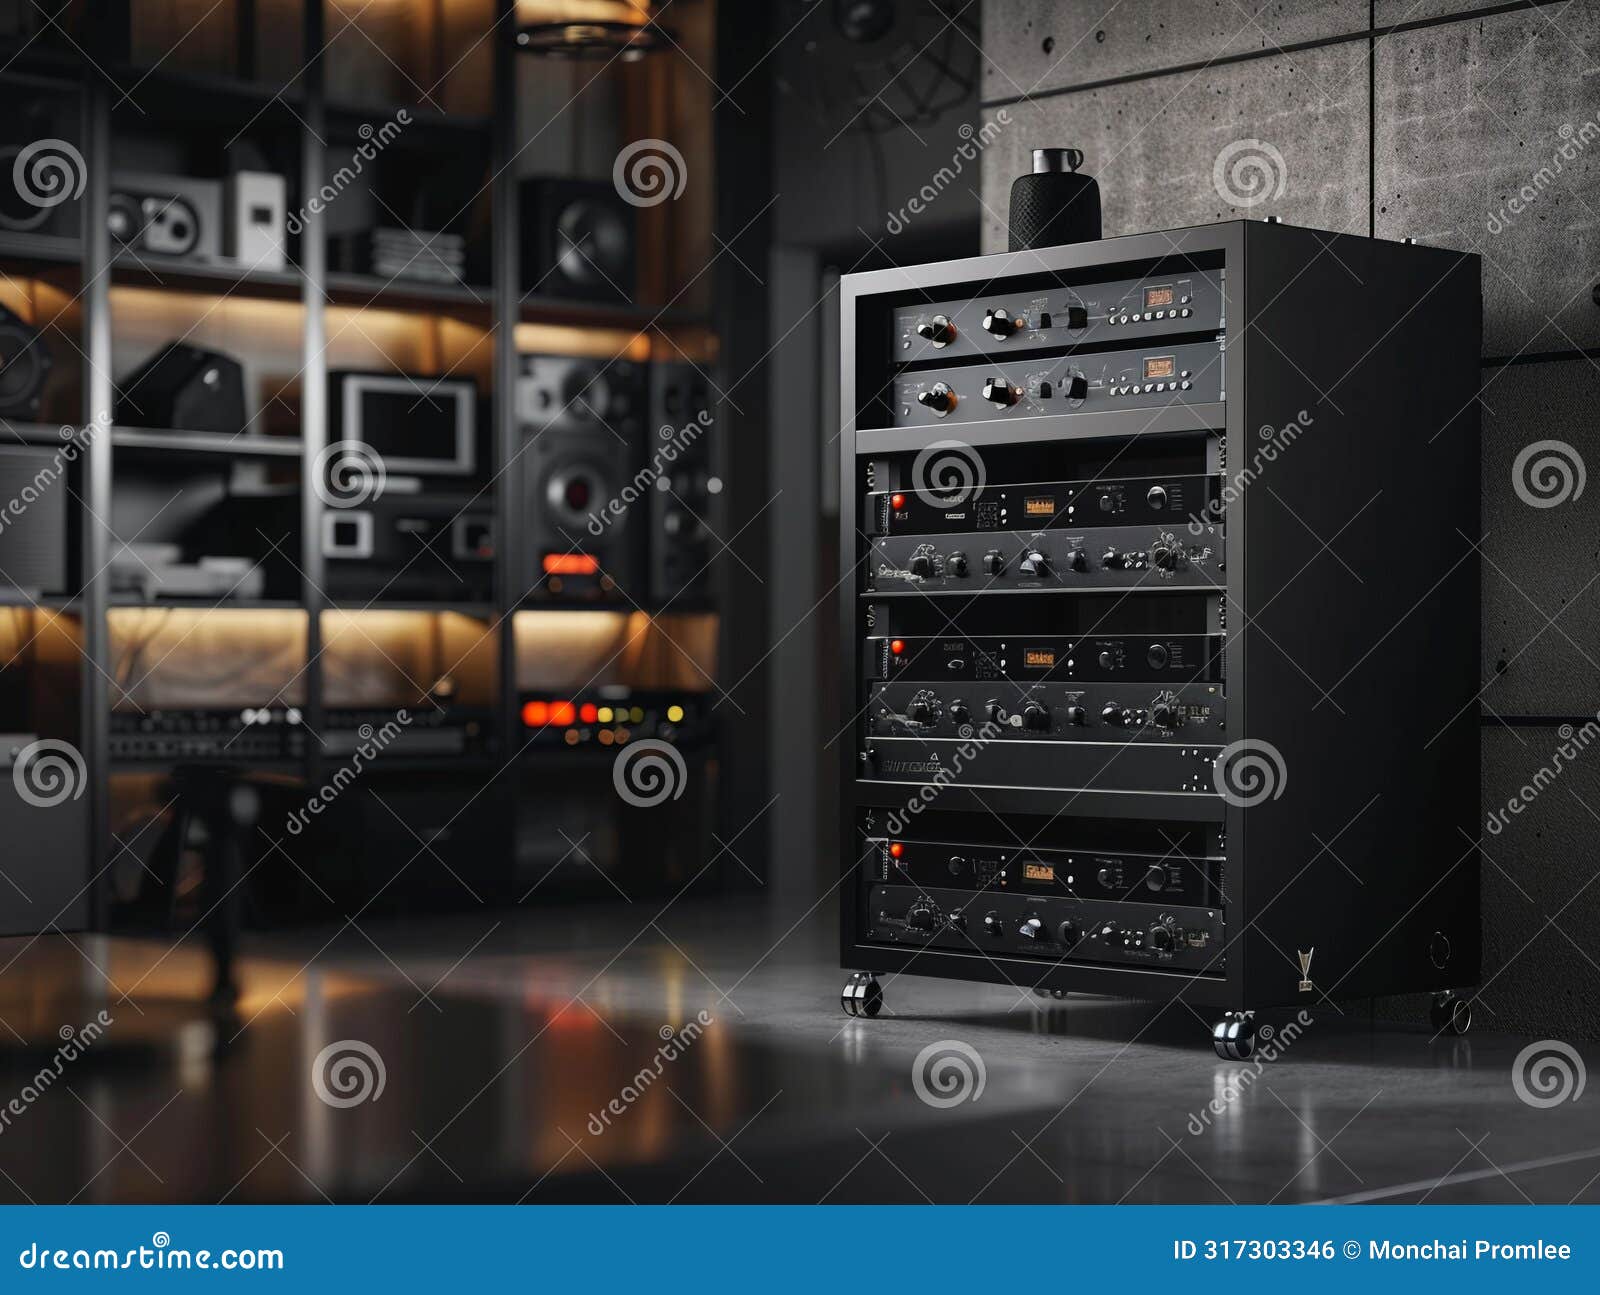 product launch of a new line of high-fidelity sound equipment for professional networks